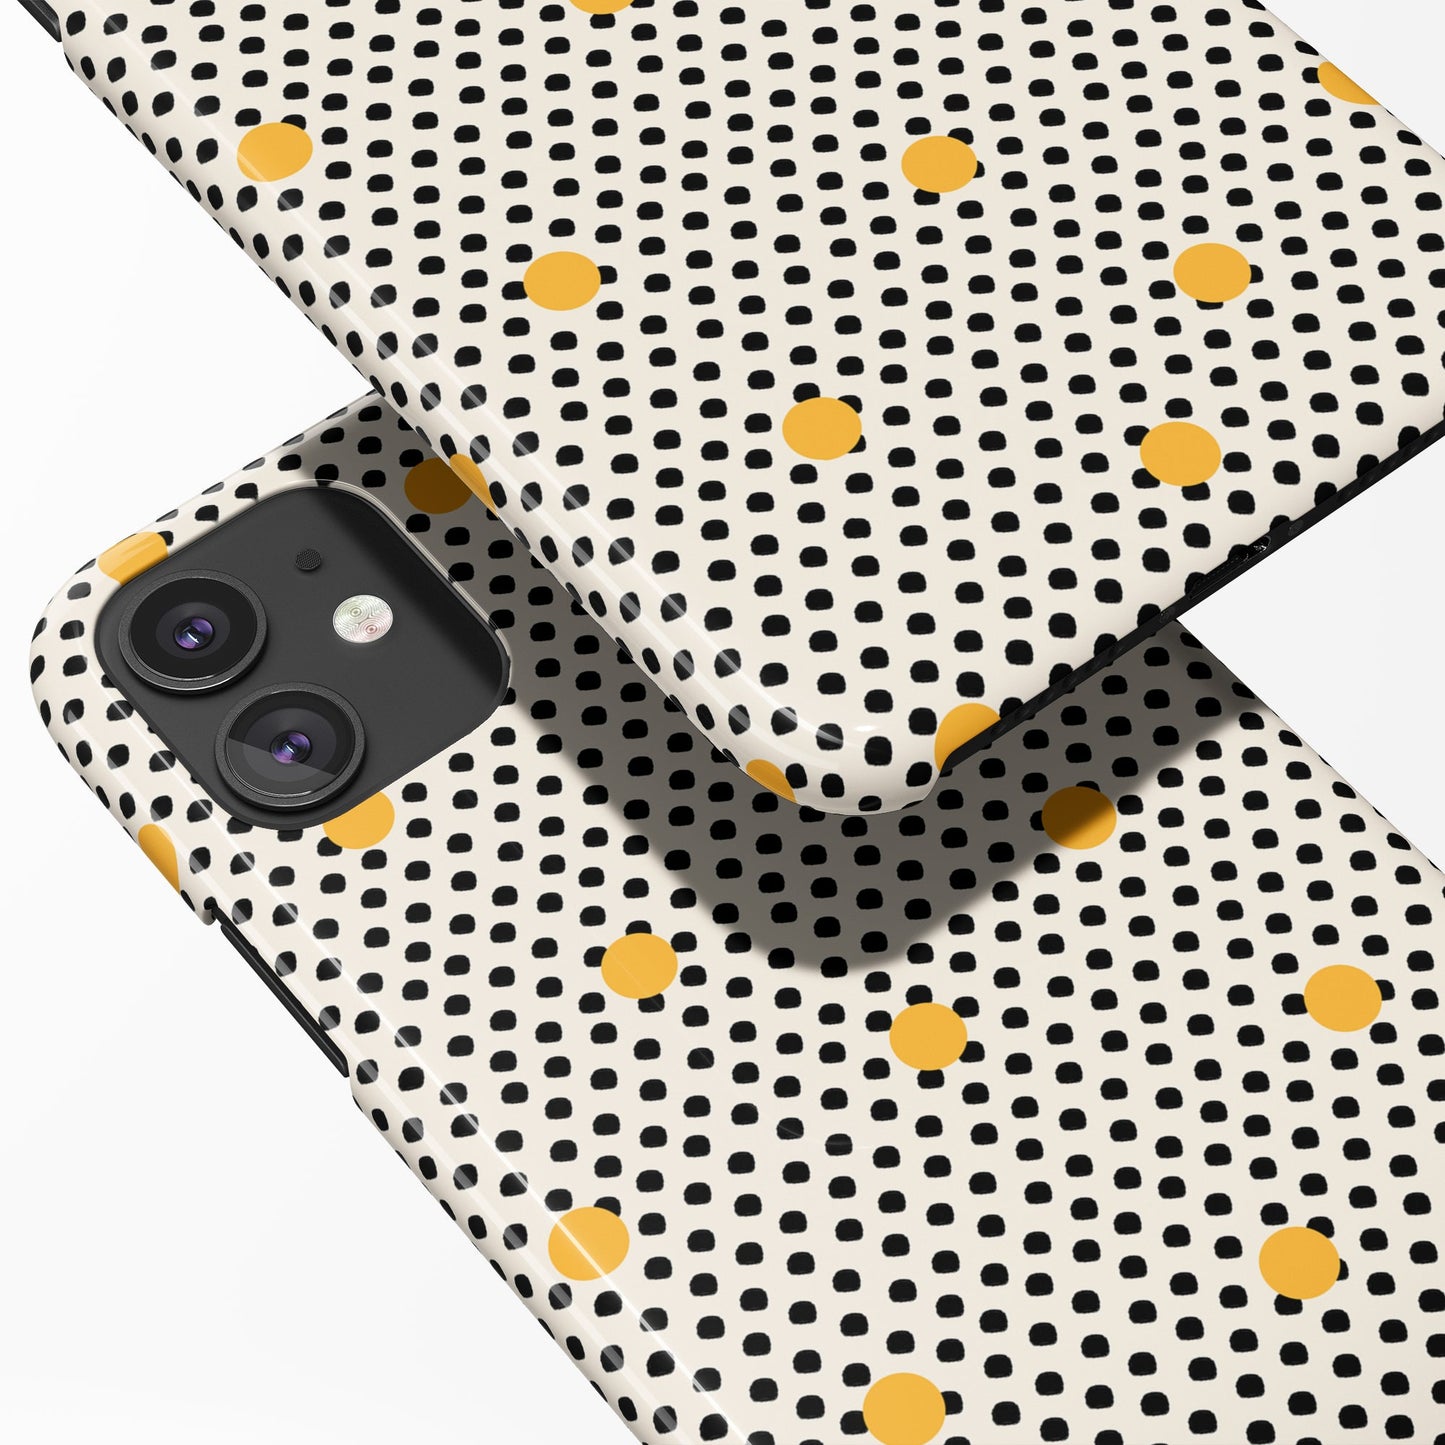 Dots Pattern iPhone Case